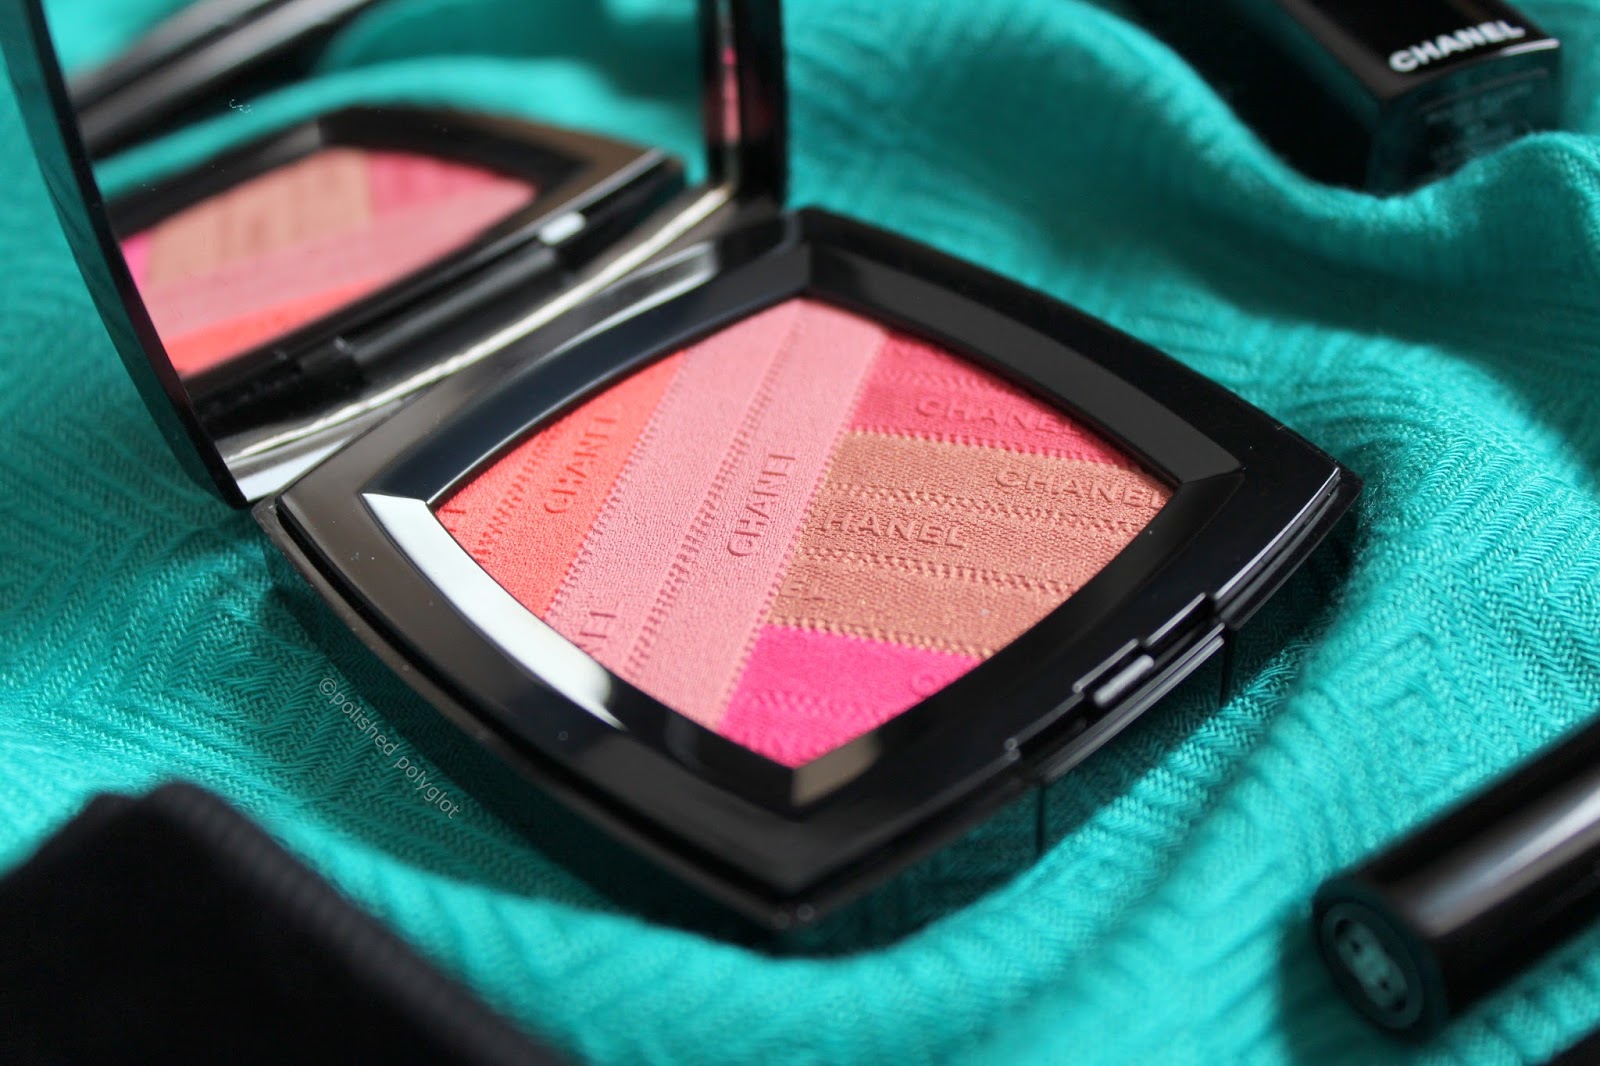 Chanel Sunkiss Ribbon blush. Too pretty to be resisted / Polished Polyglot